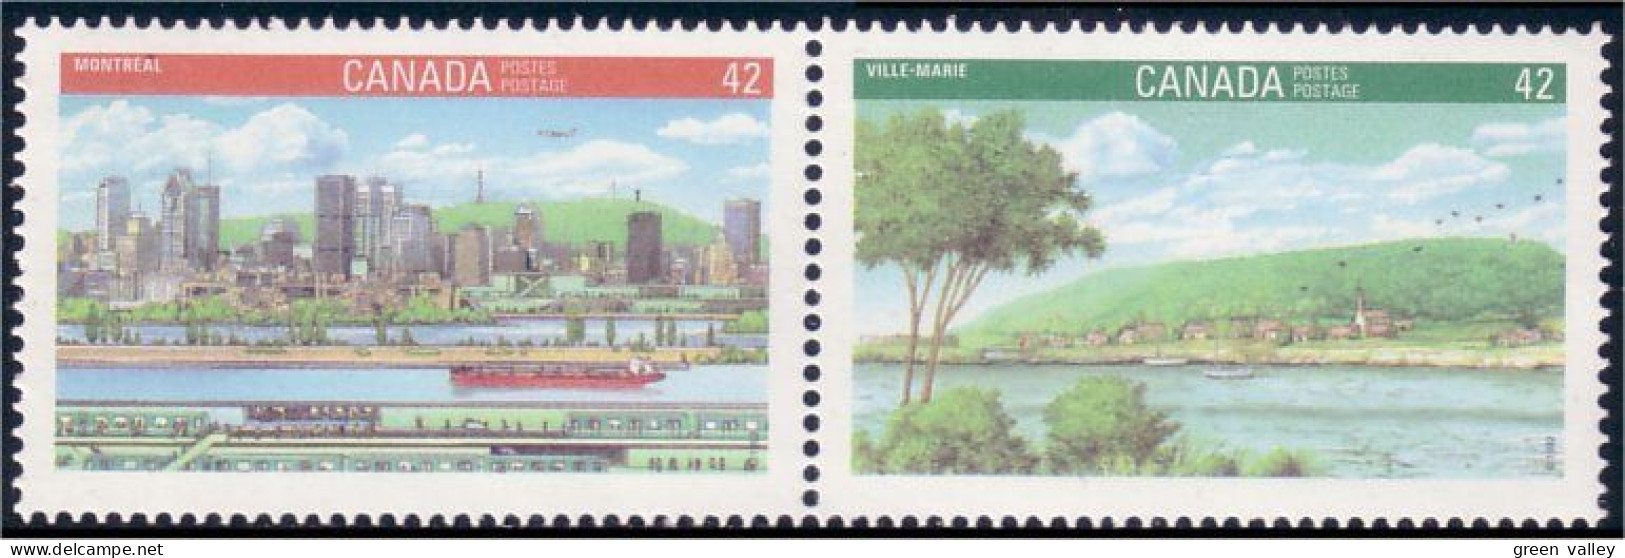 Canada Expo Canada 92 Montreal Ville-Marie MNH ** Neuf SC (C14-05aa) - Unused Stamps